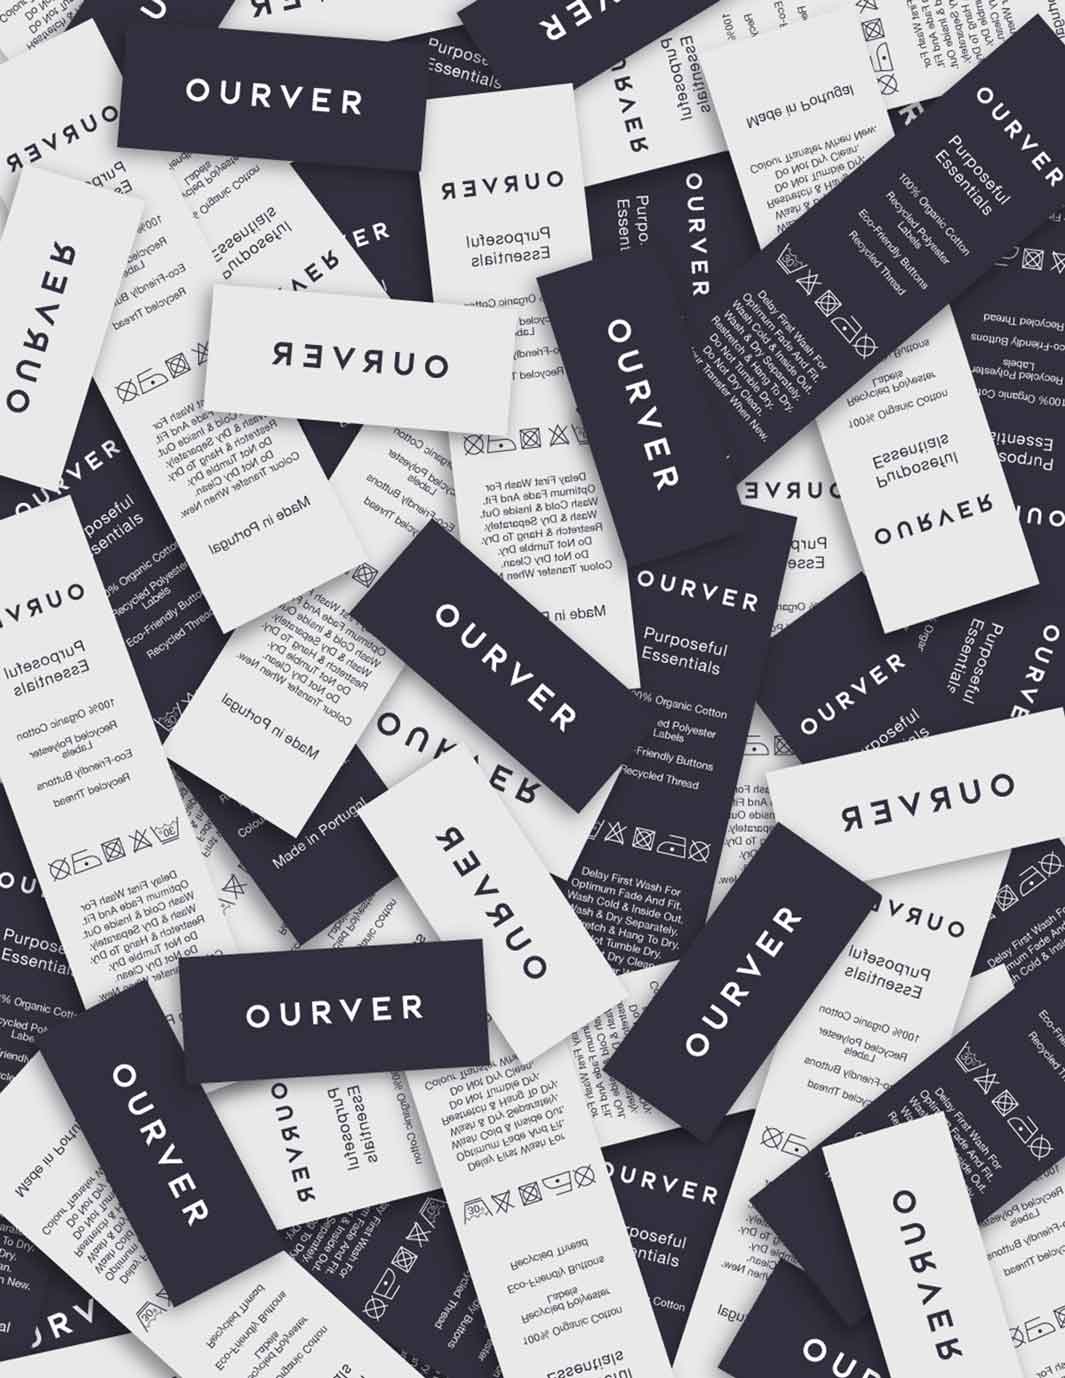 garment labels made from recycled plastic